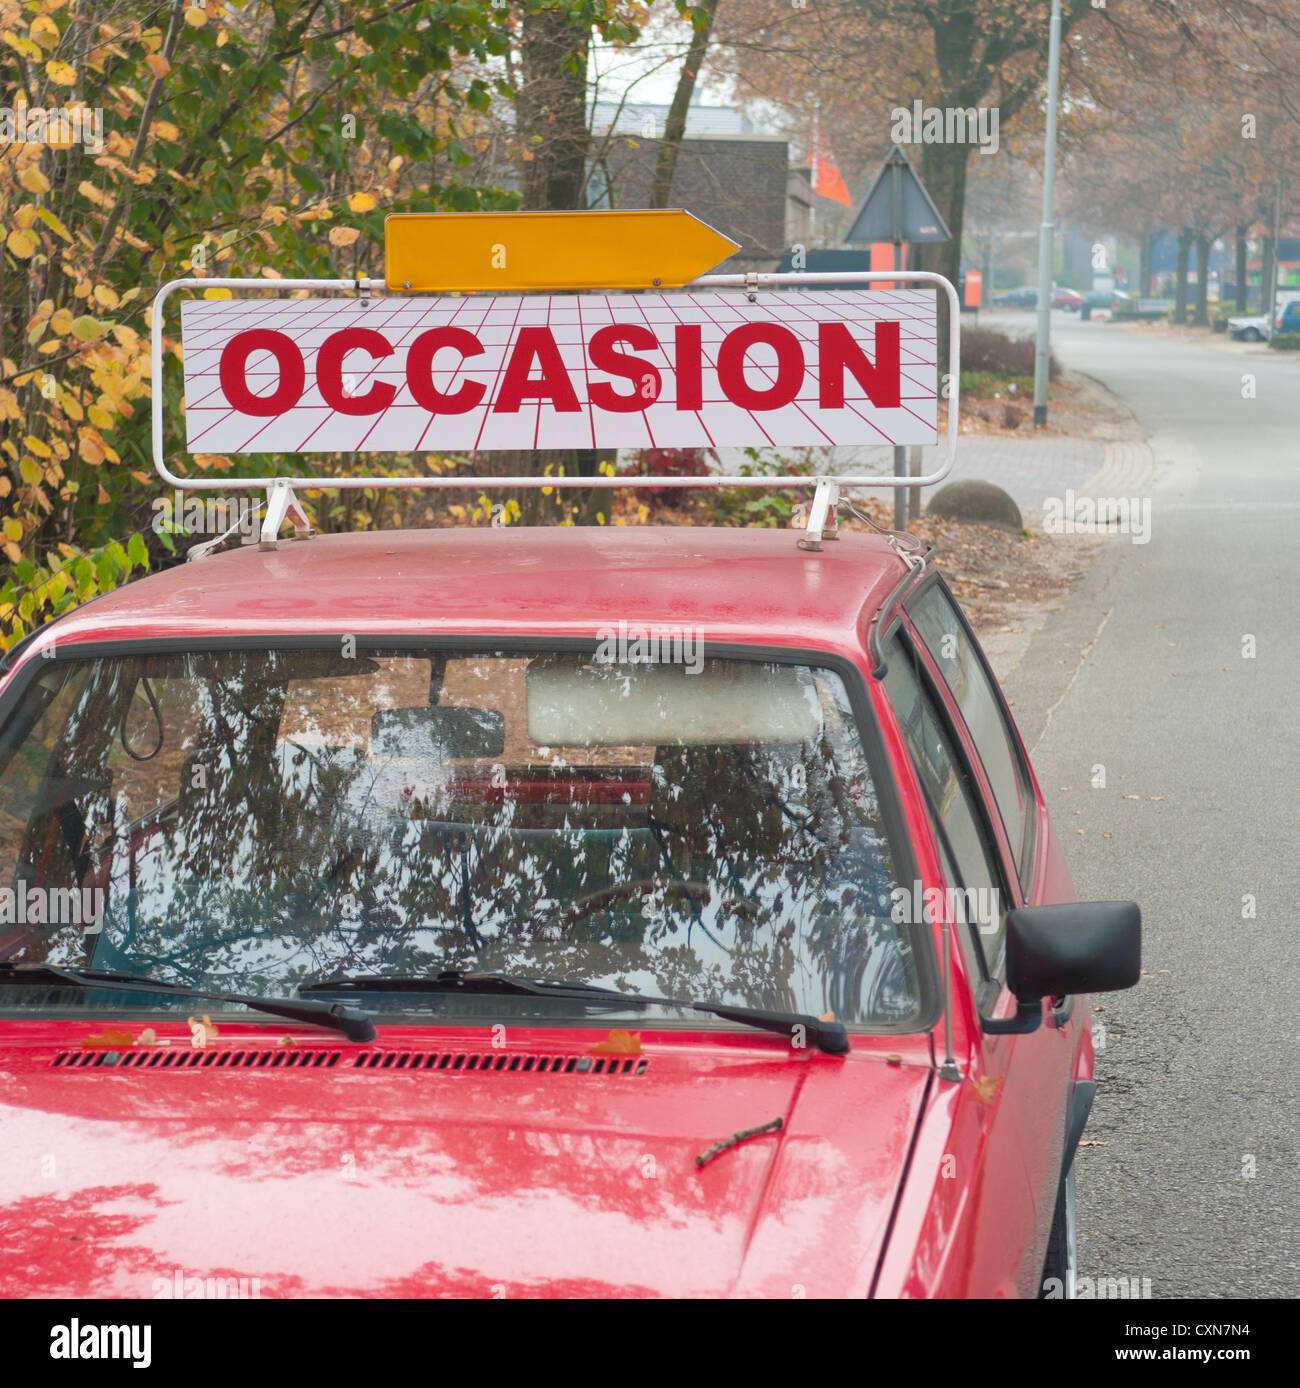 car with an 'occasion' shield on top Stock Photo